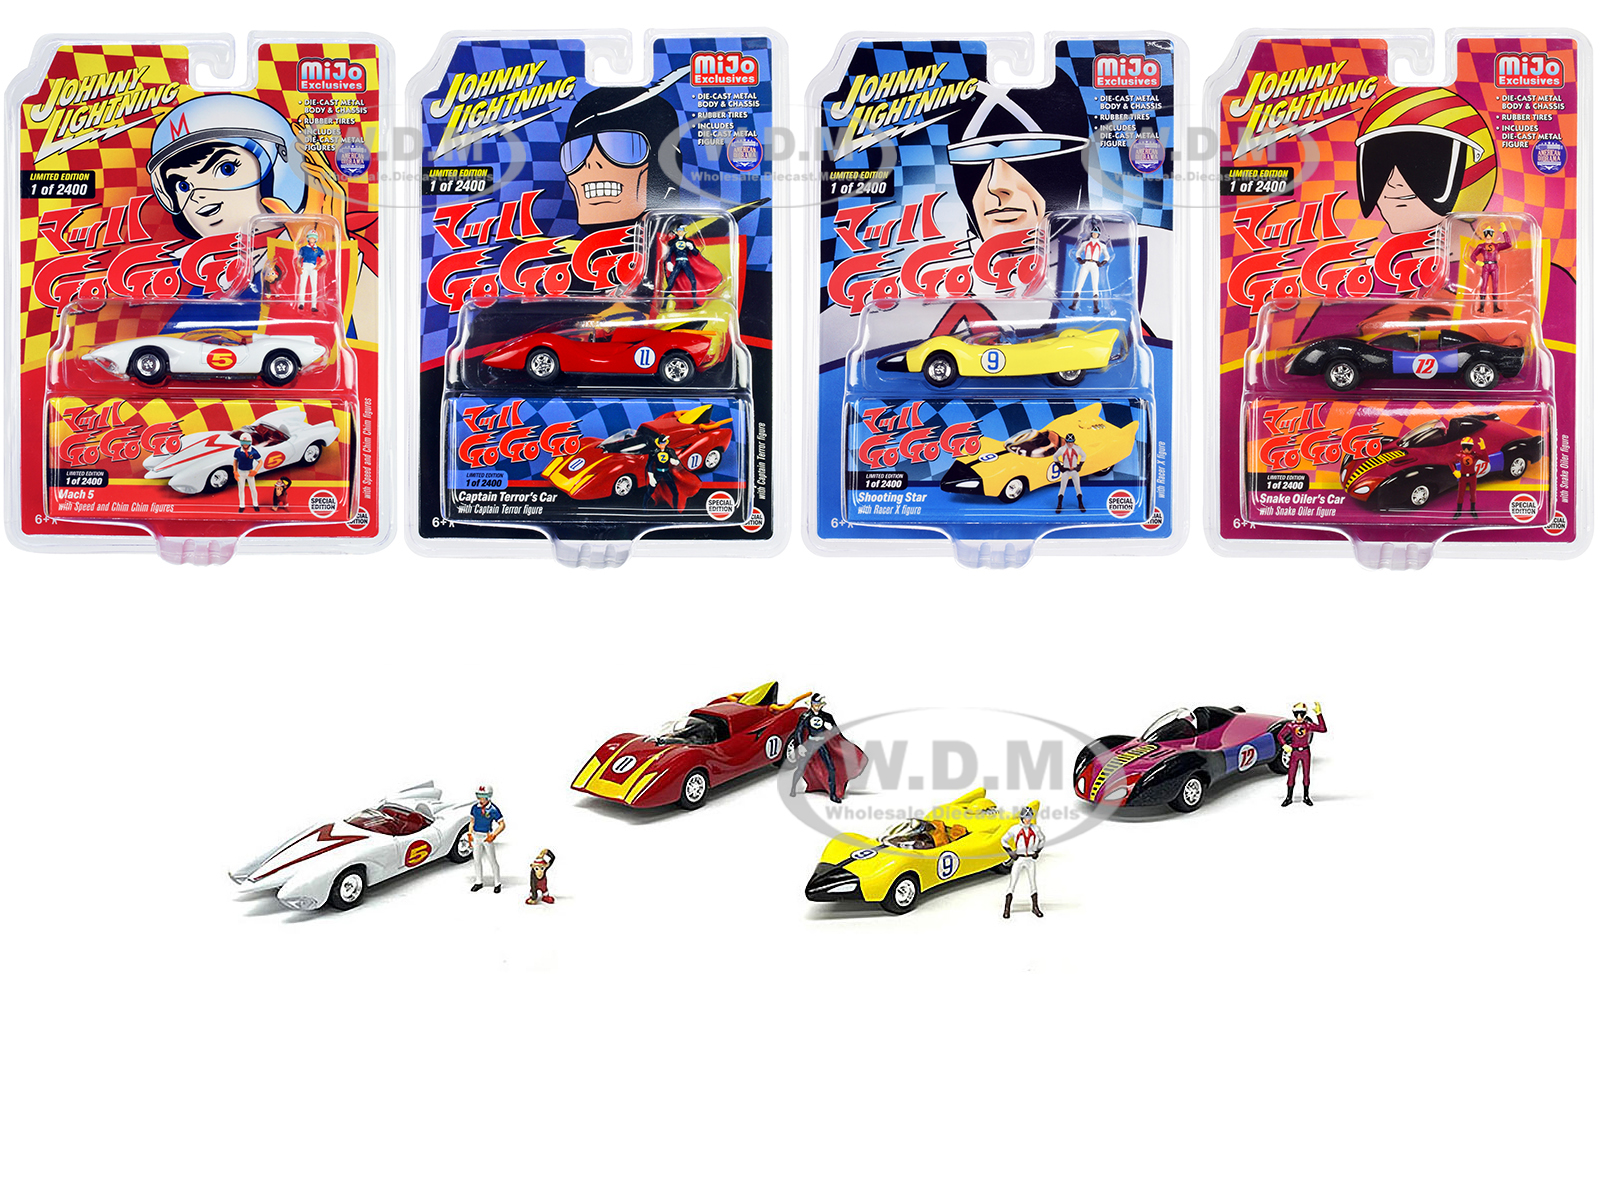 "Speed Racer" 4 Car Set with American Diorama Figures 1/64 Diecast Model Cars by Johnny Lightning